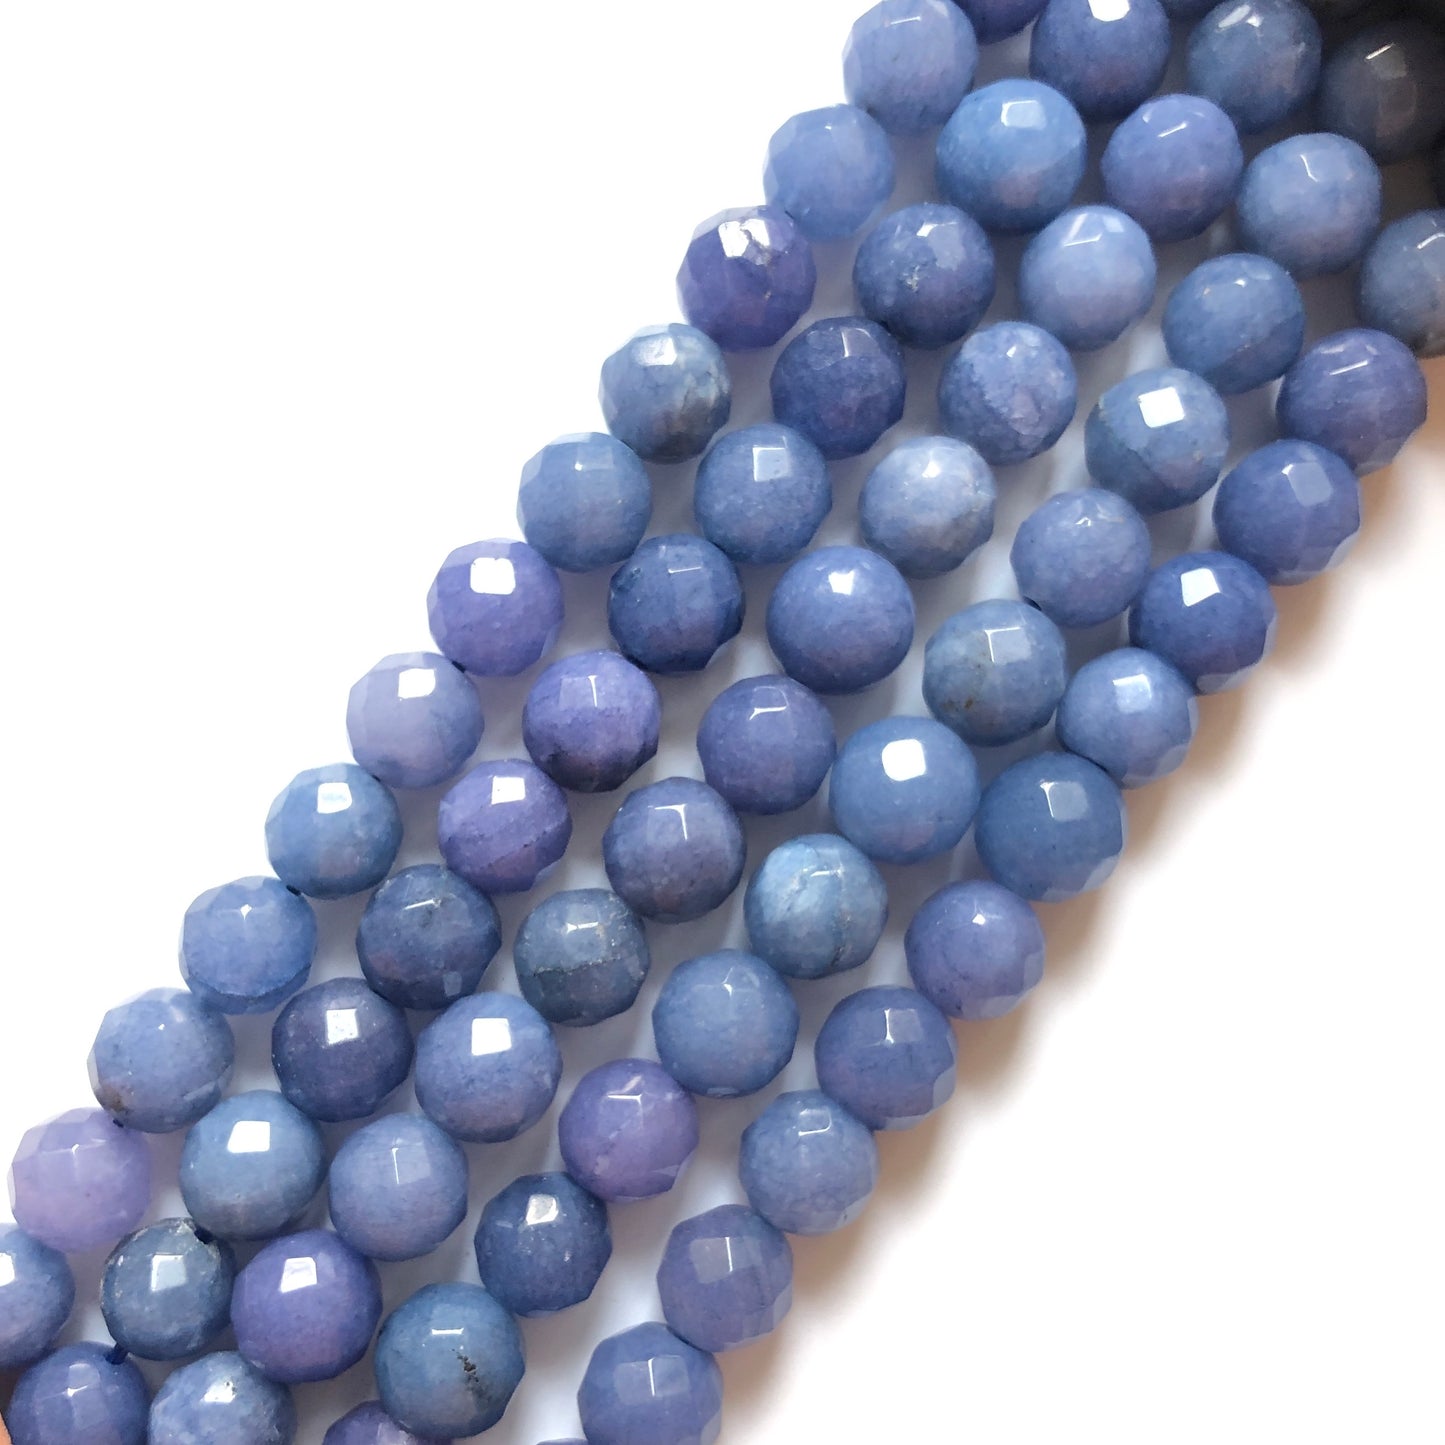 2 Strands/lot 10mm Blue Faceted Jade Stone Beads Stone Beads Faceted Jade Beads Charms Beads Beyond